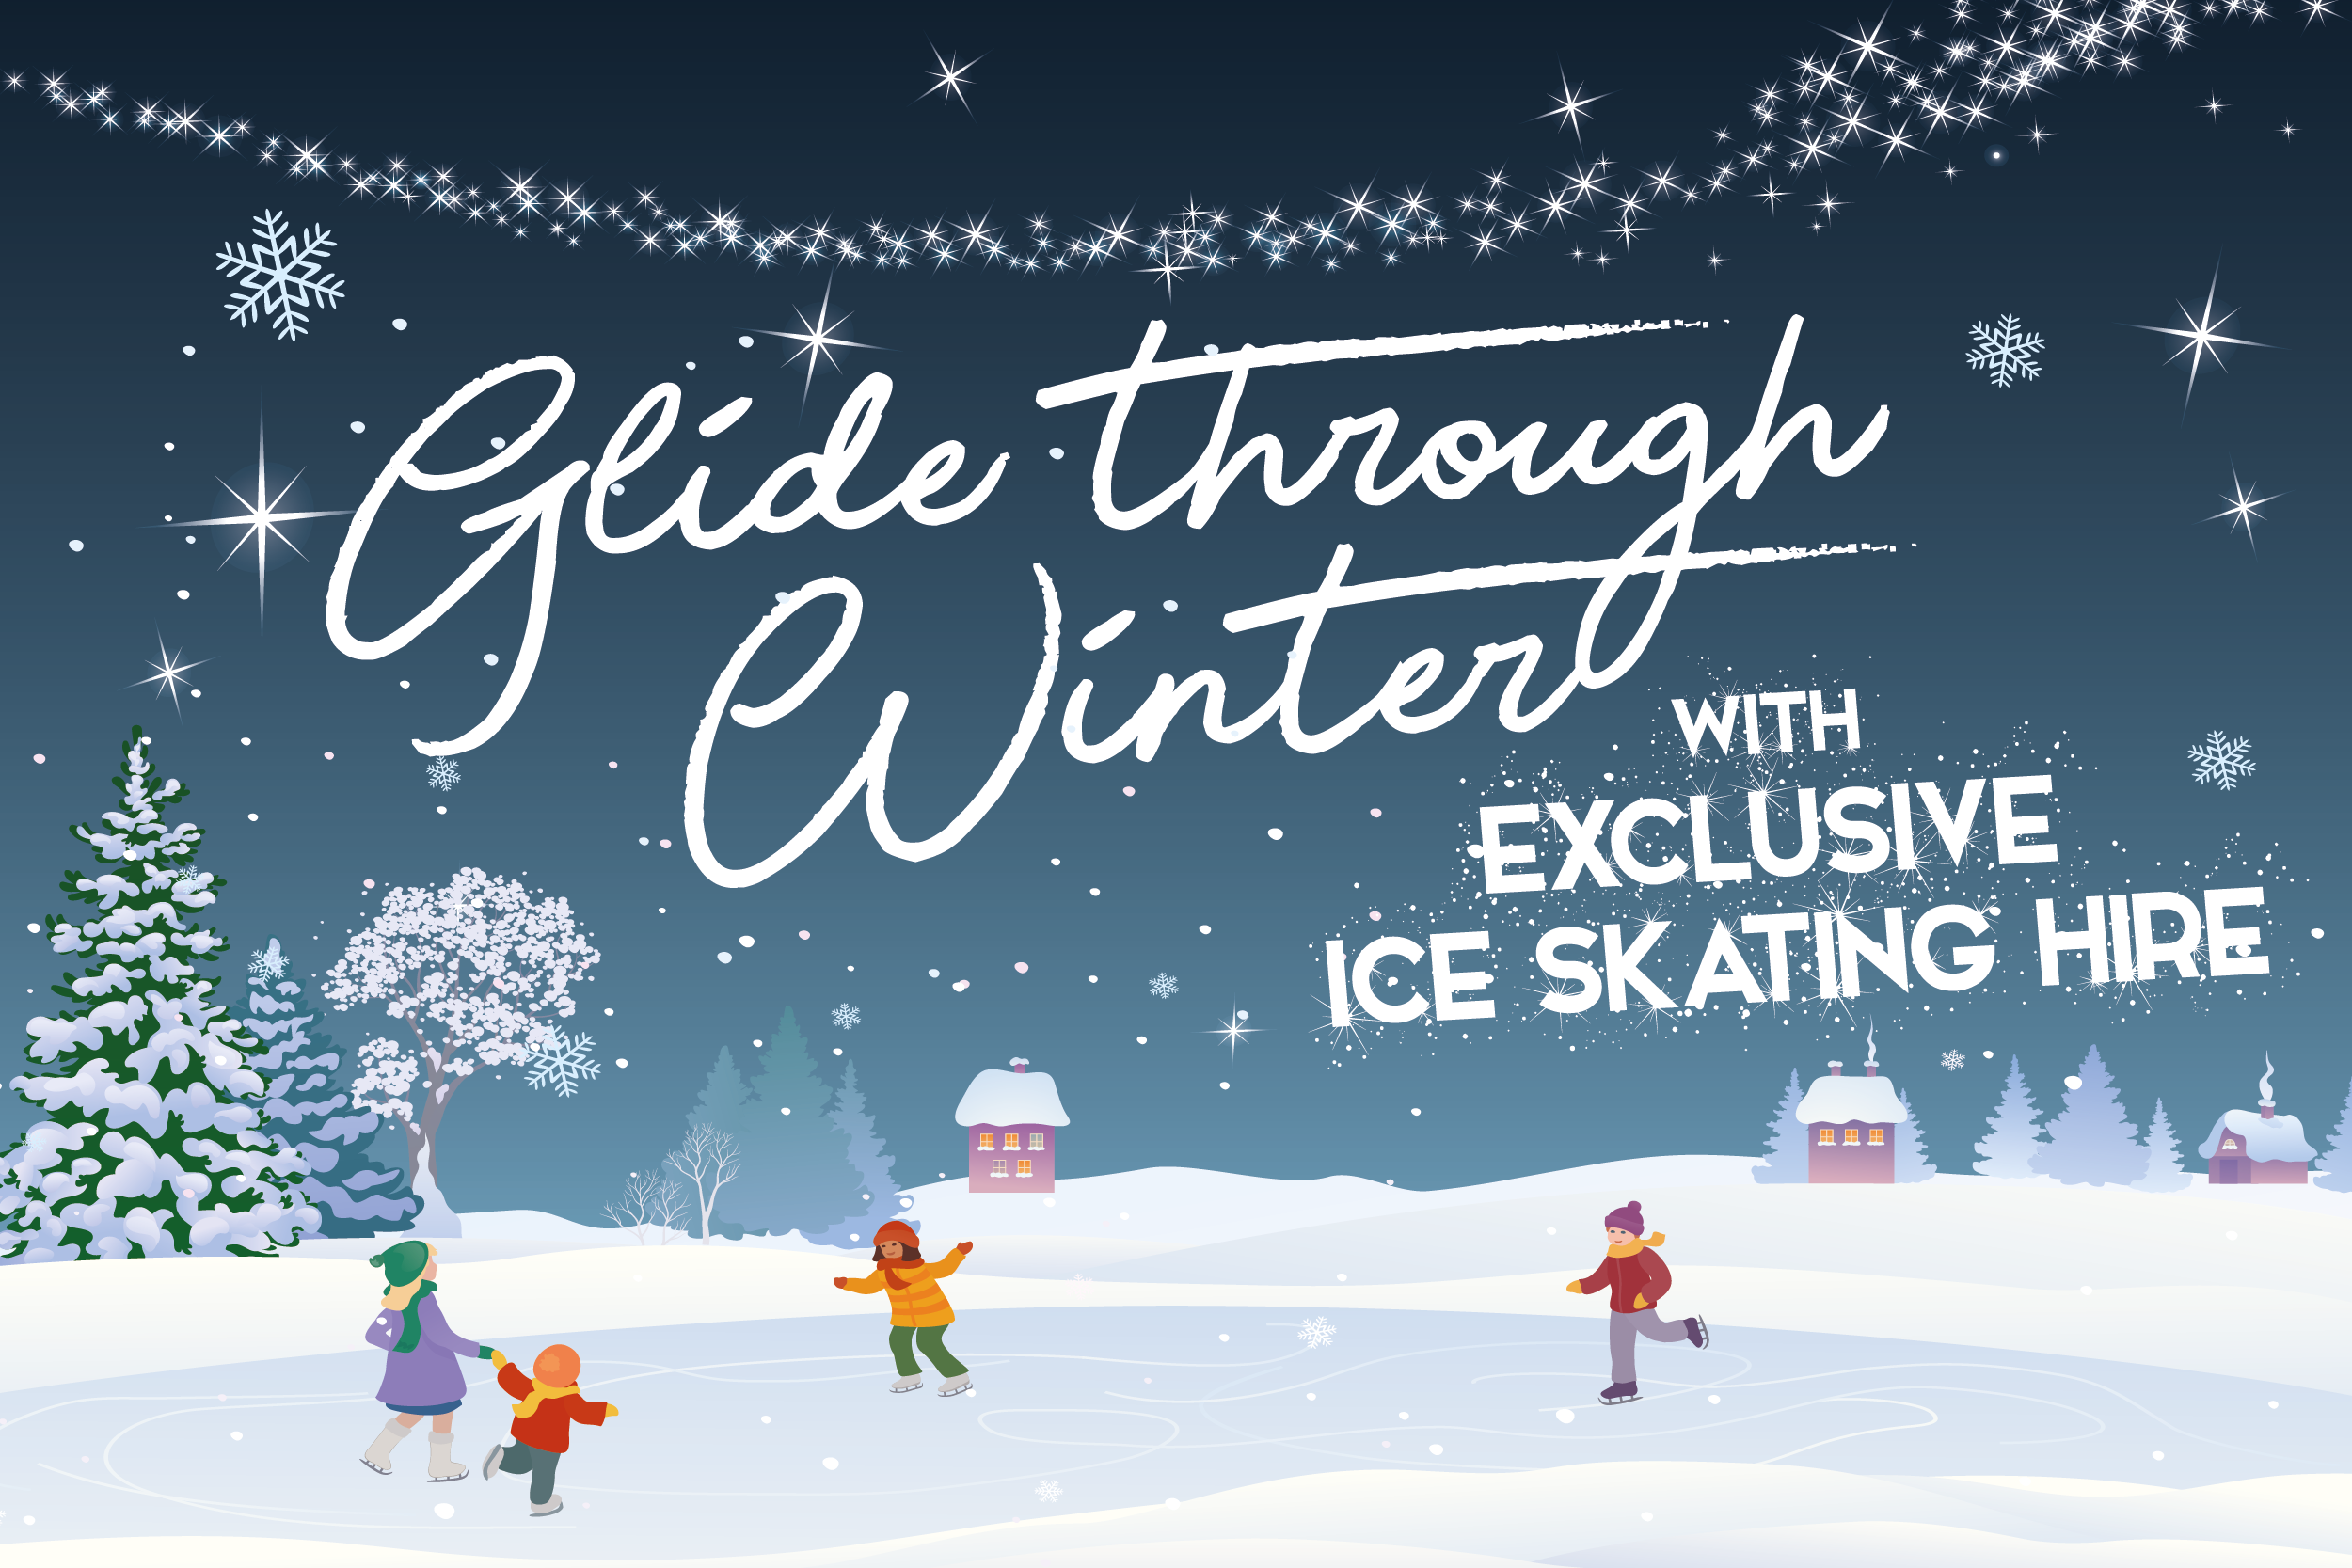 Ice Skating Rink Exclusive Hire